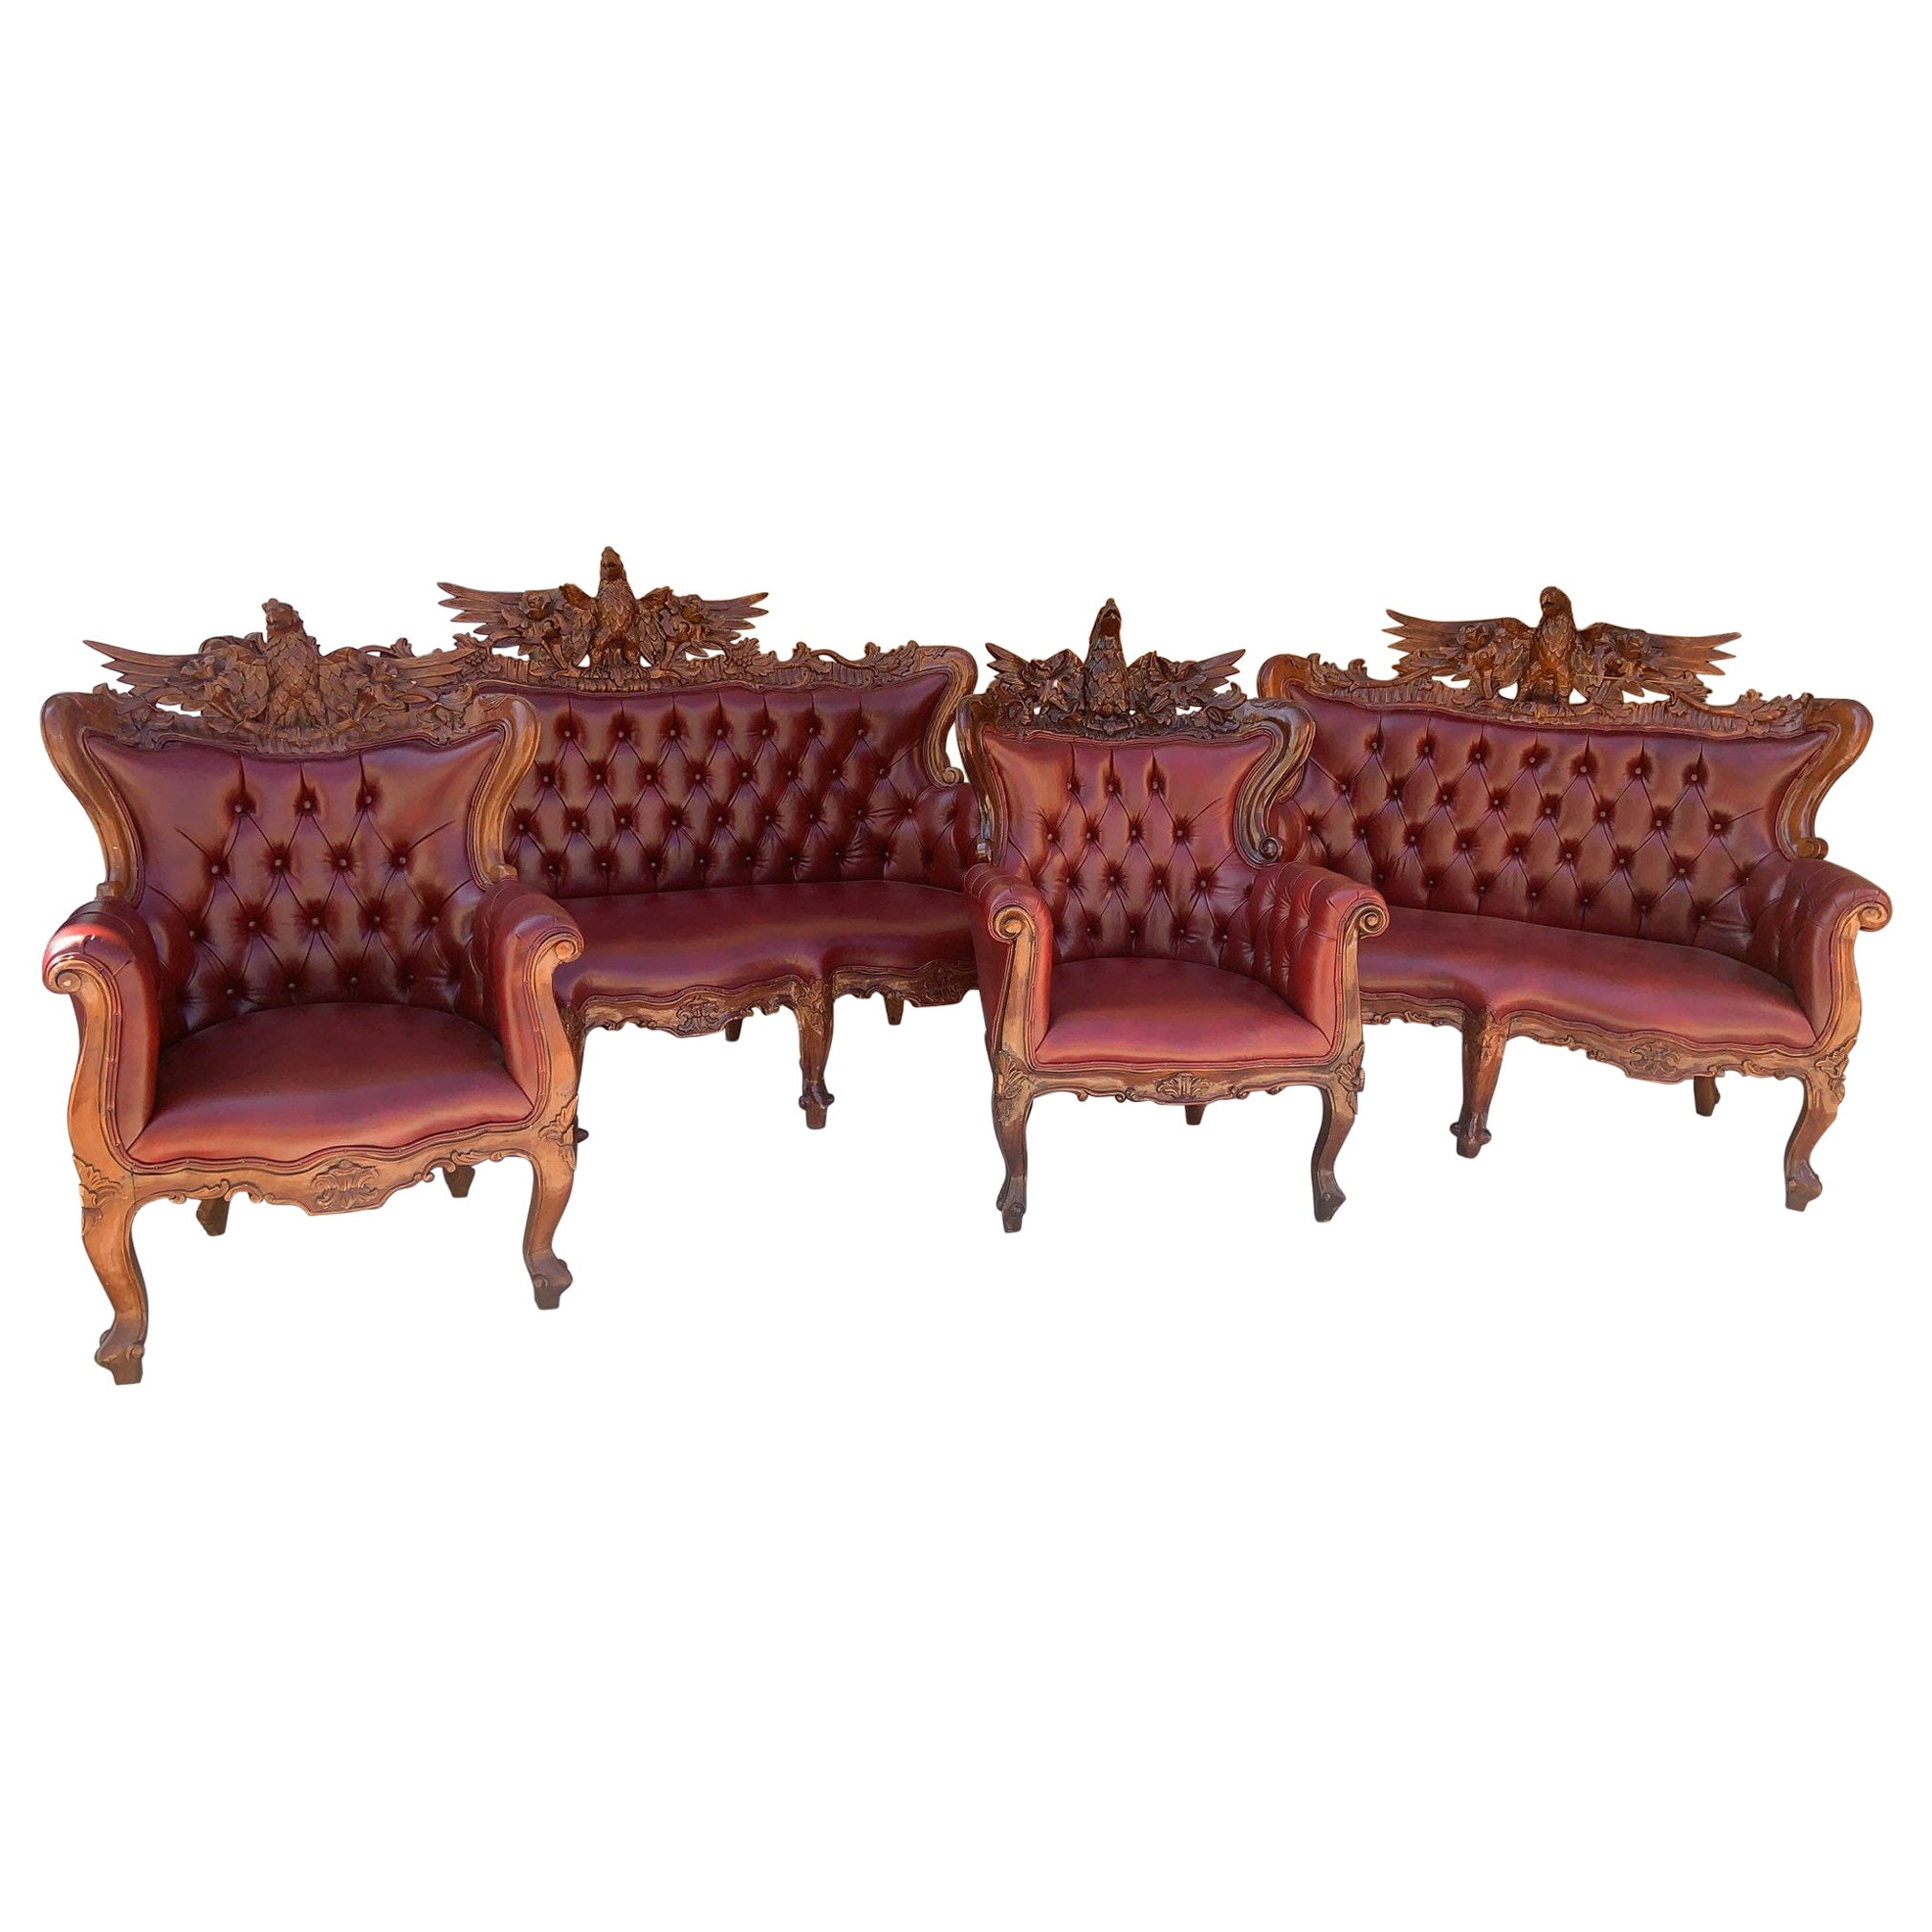 Antique Victorian Carved Medallion Back Sofa with 2 Side Chairs Parlor Set  For Sale at 1stDibs | medallion sofa, antique parlor couch, victorian sofa  set